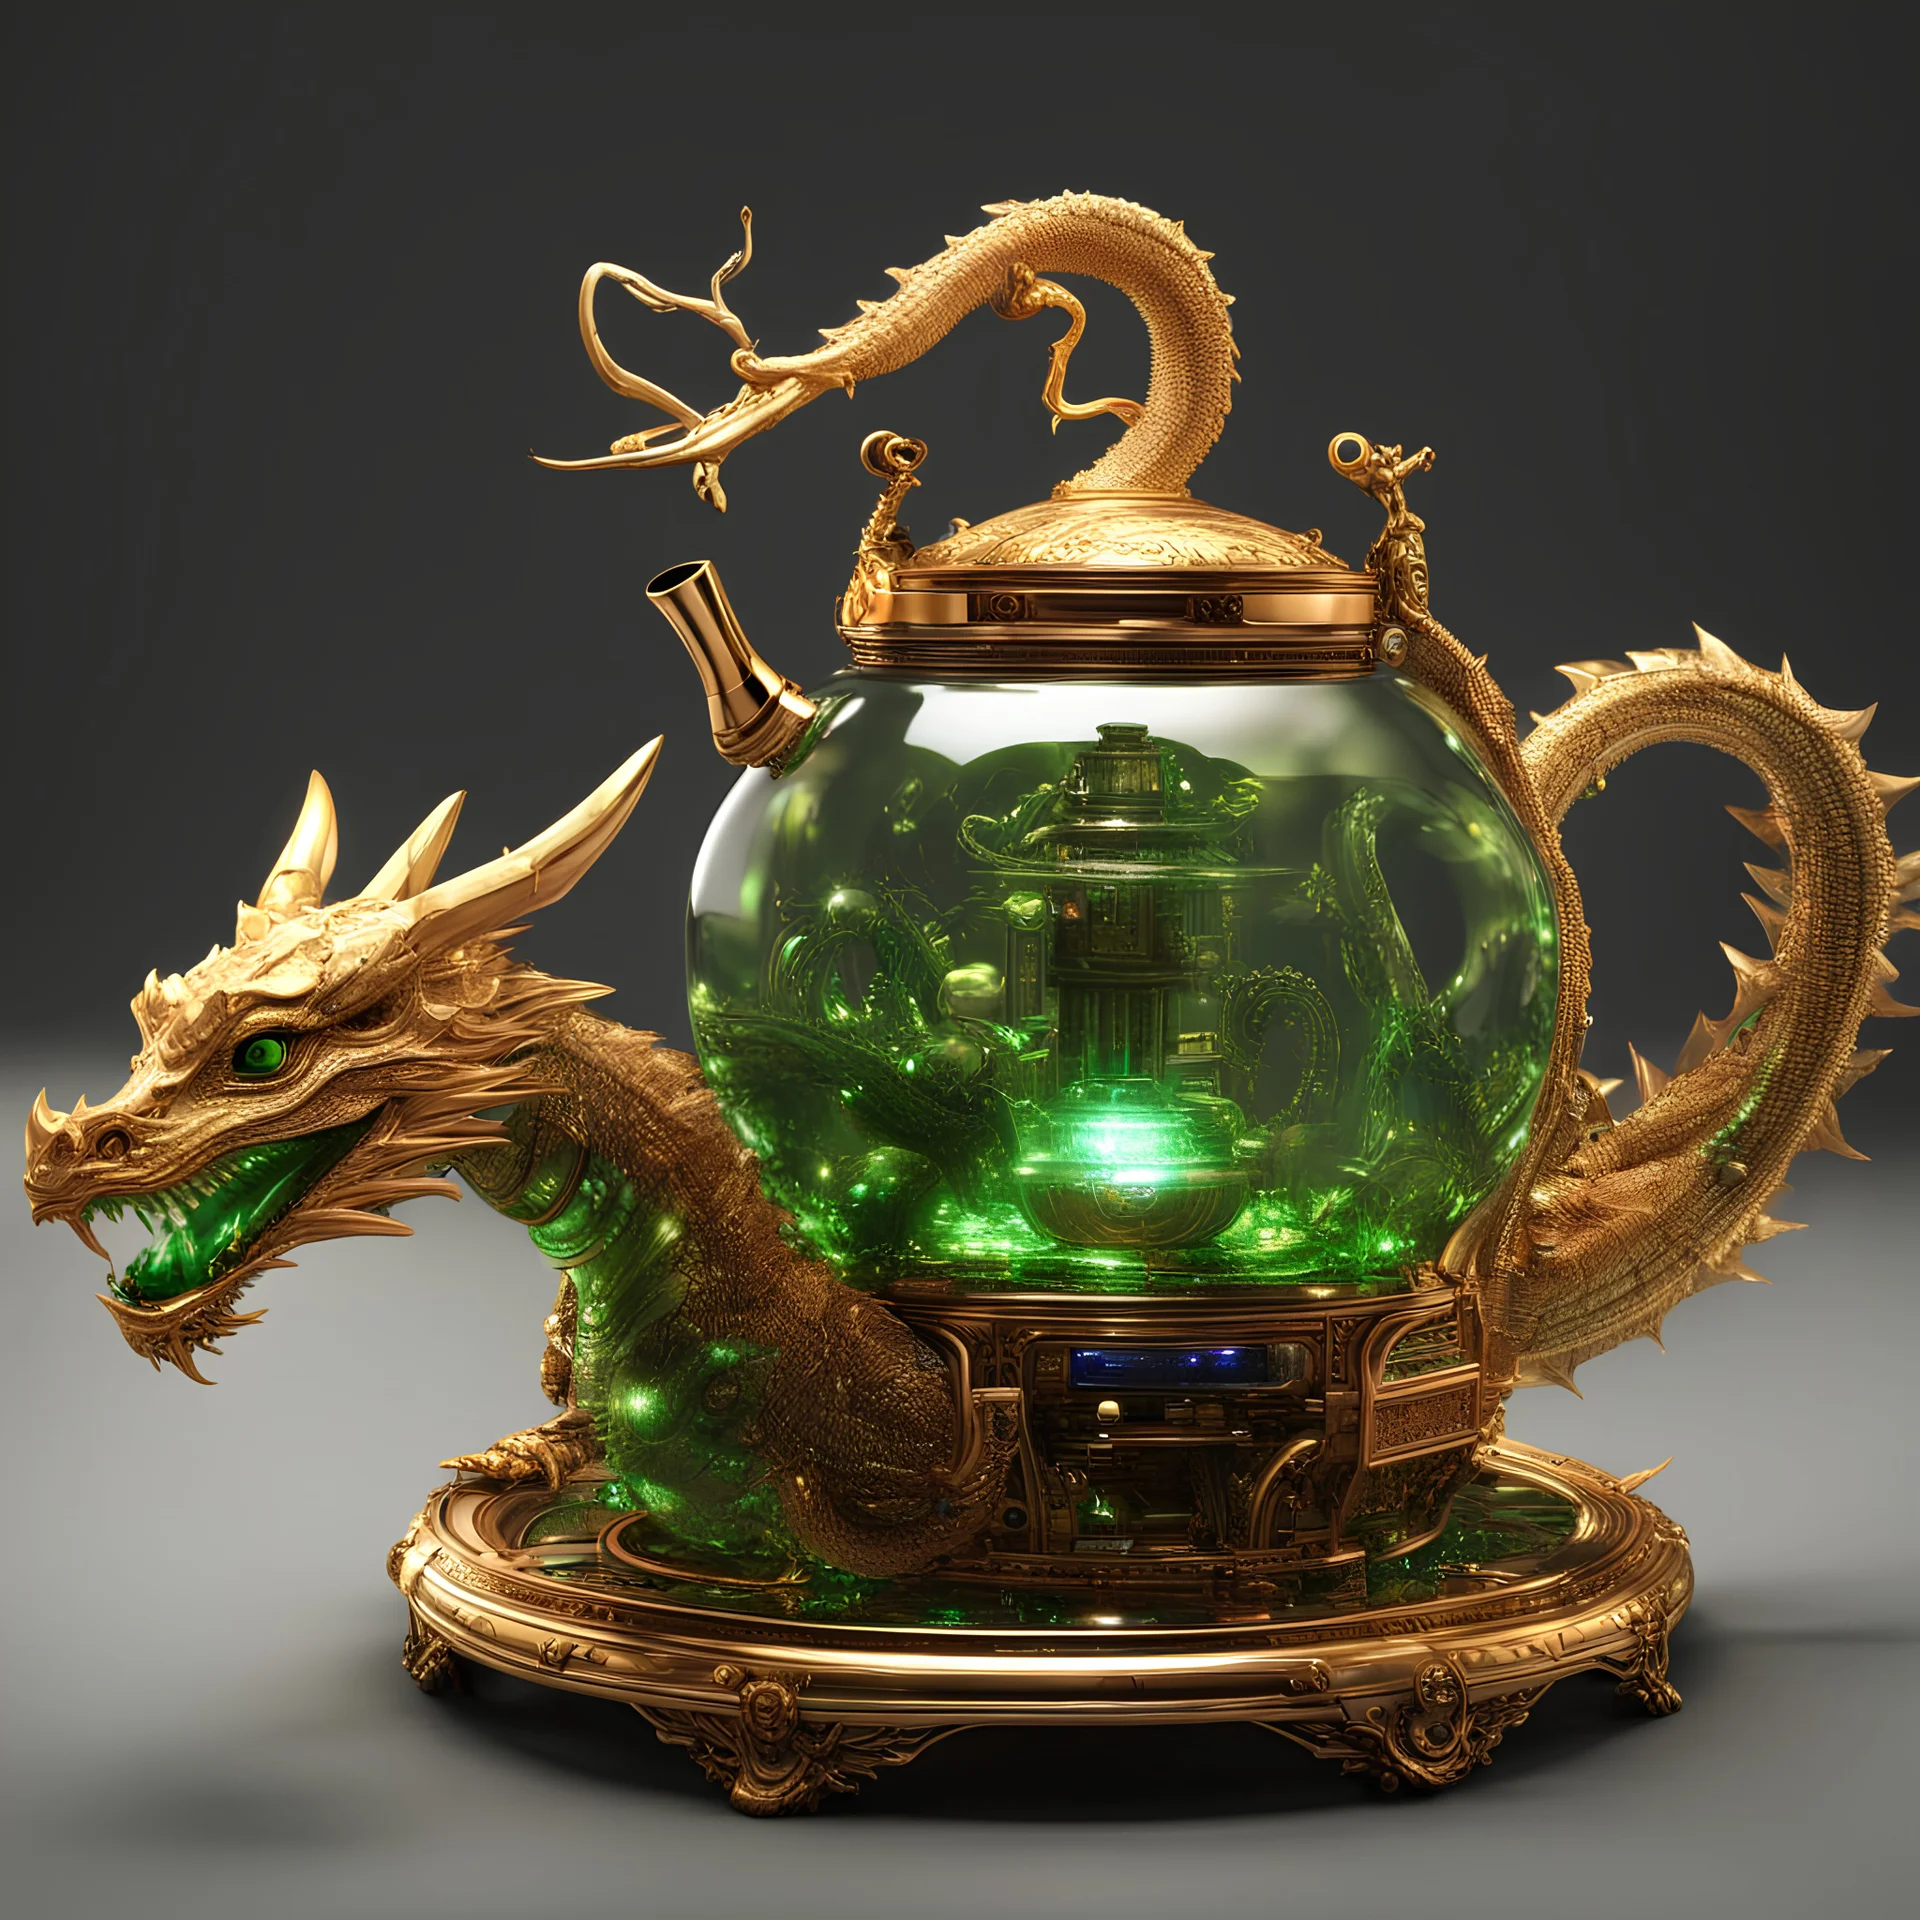 a golden dragon with diamonds all over his body,holding a transparent Chinese teapot with an LED digital display on the side of the teapot,green liquid in the teapot,full light on all parts of the teapot,steampunk,3d